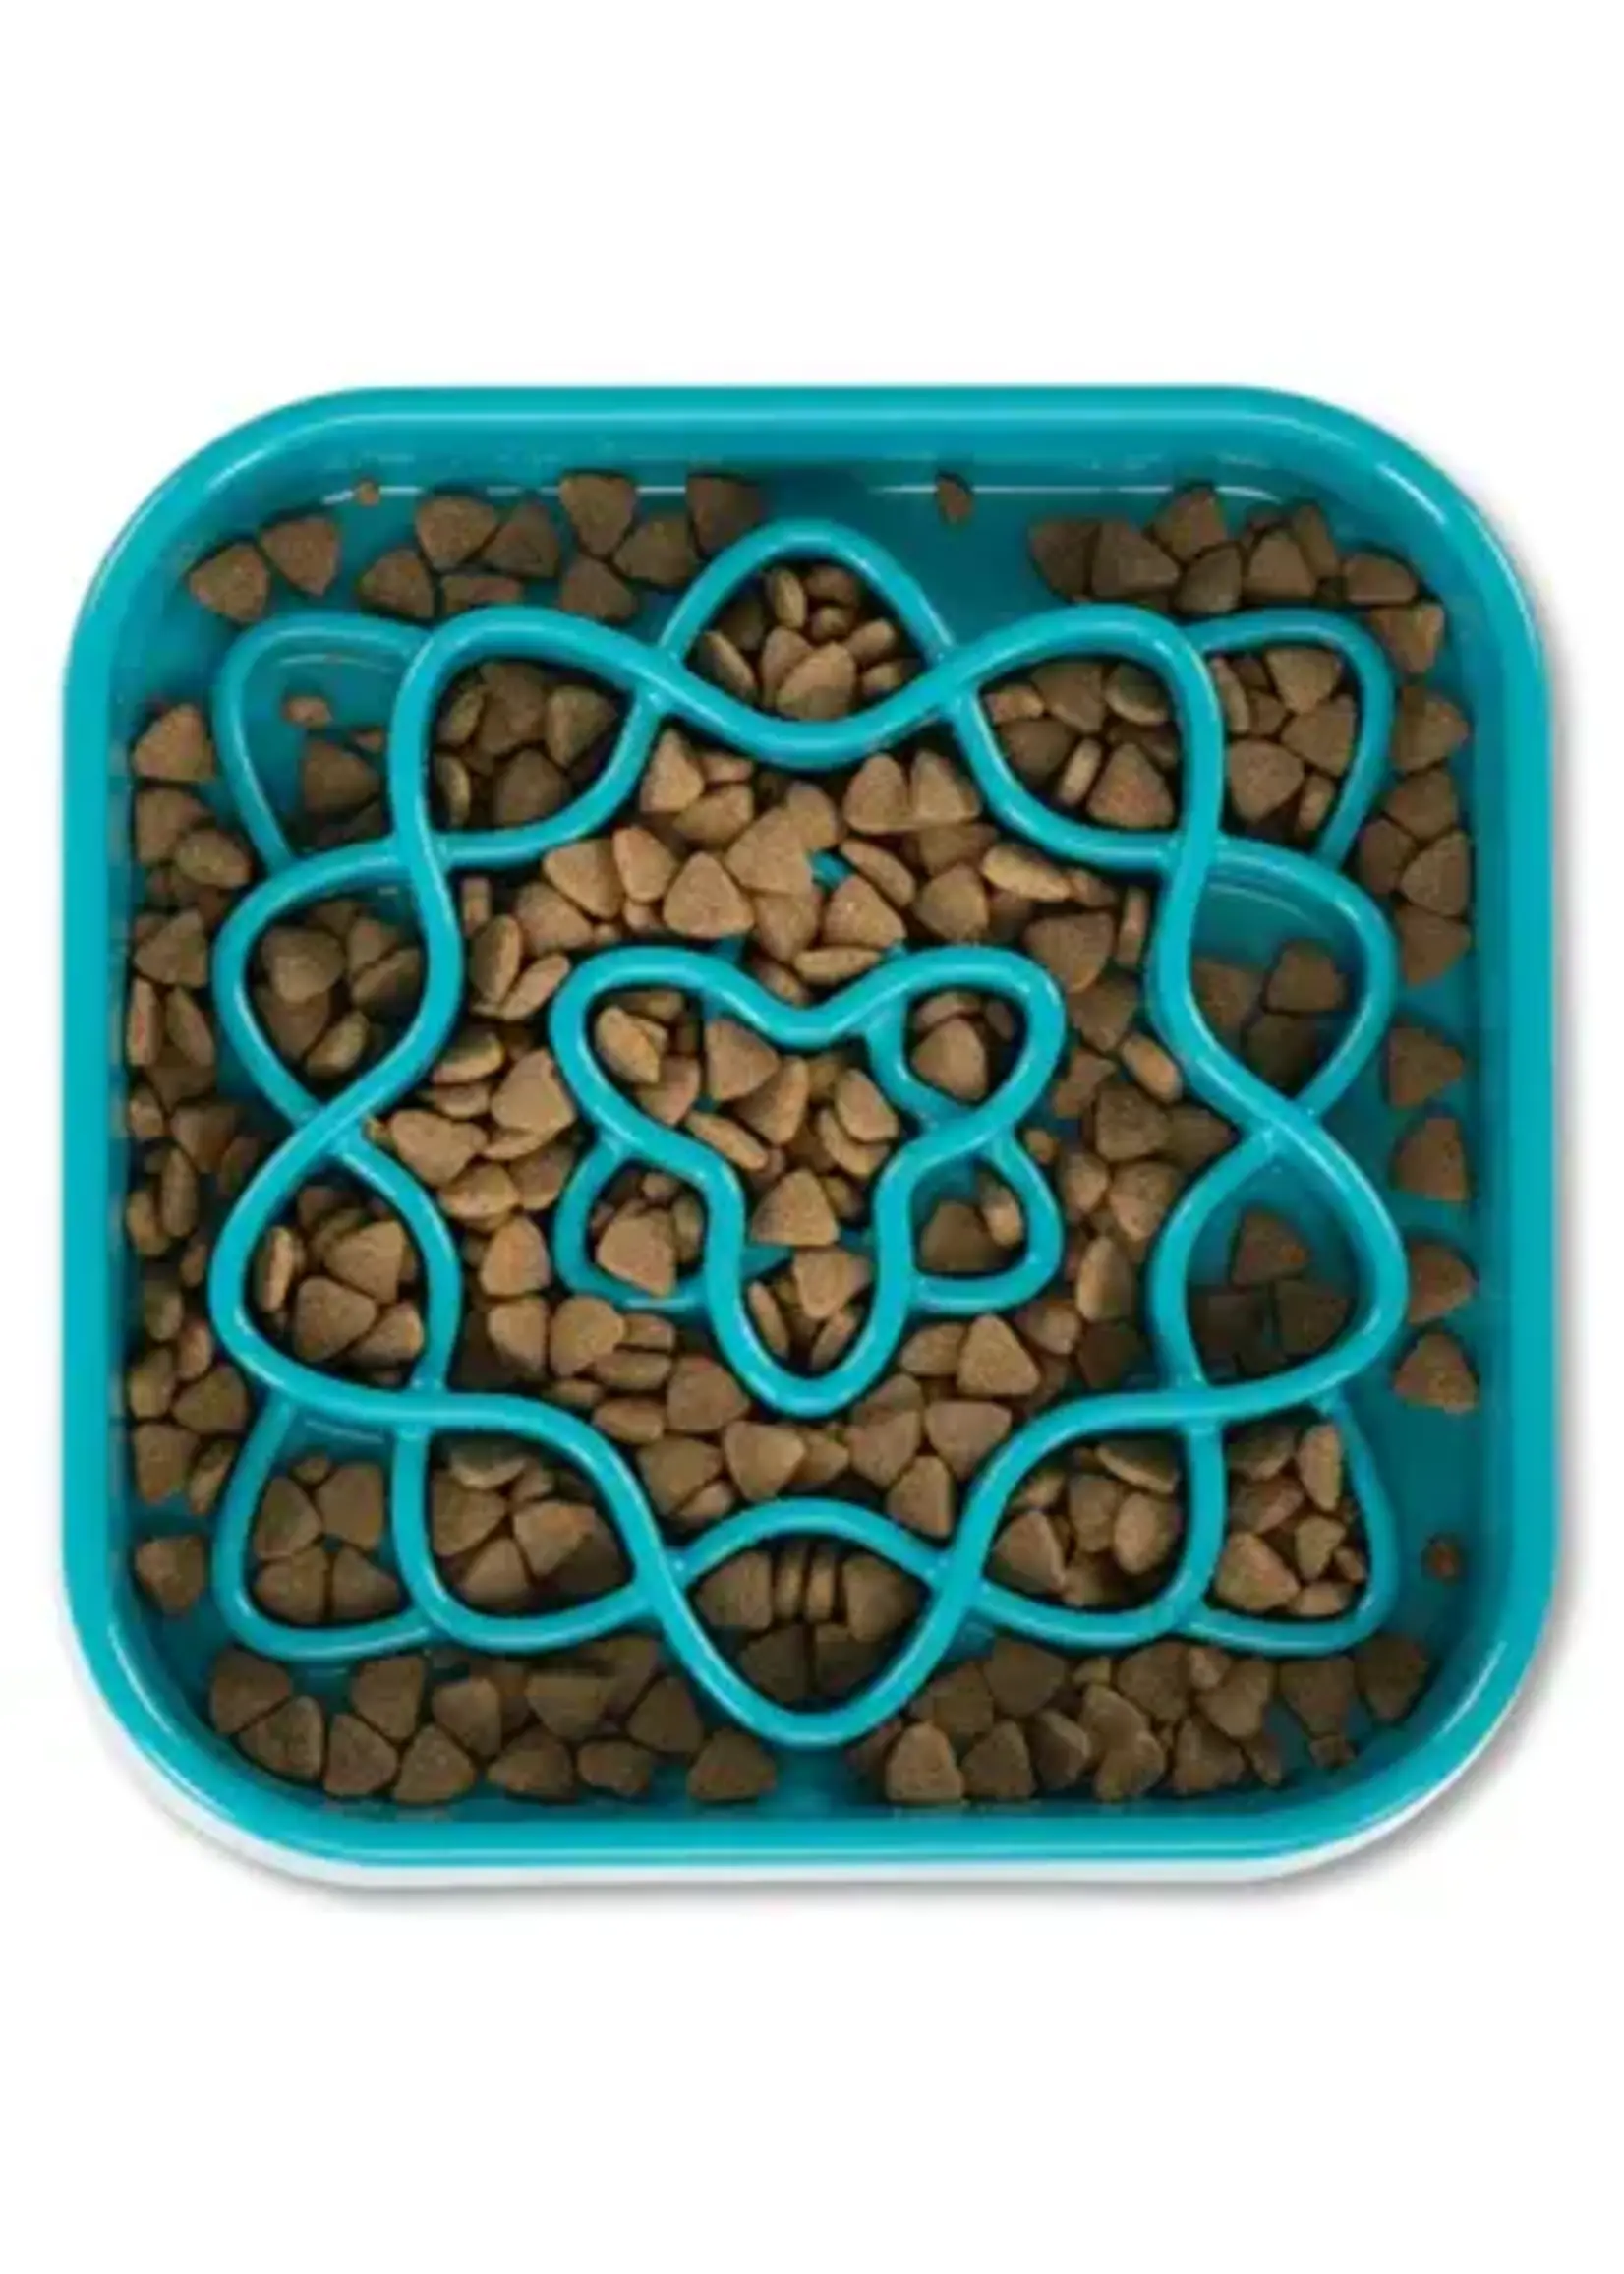 Messy Mutts Messy Mutts - Interactive Square Slow Feeder Blue